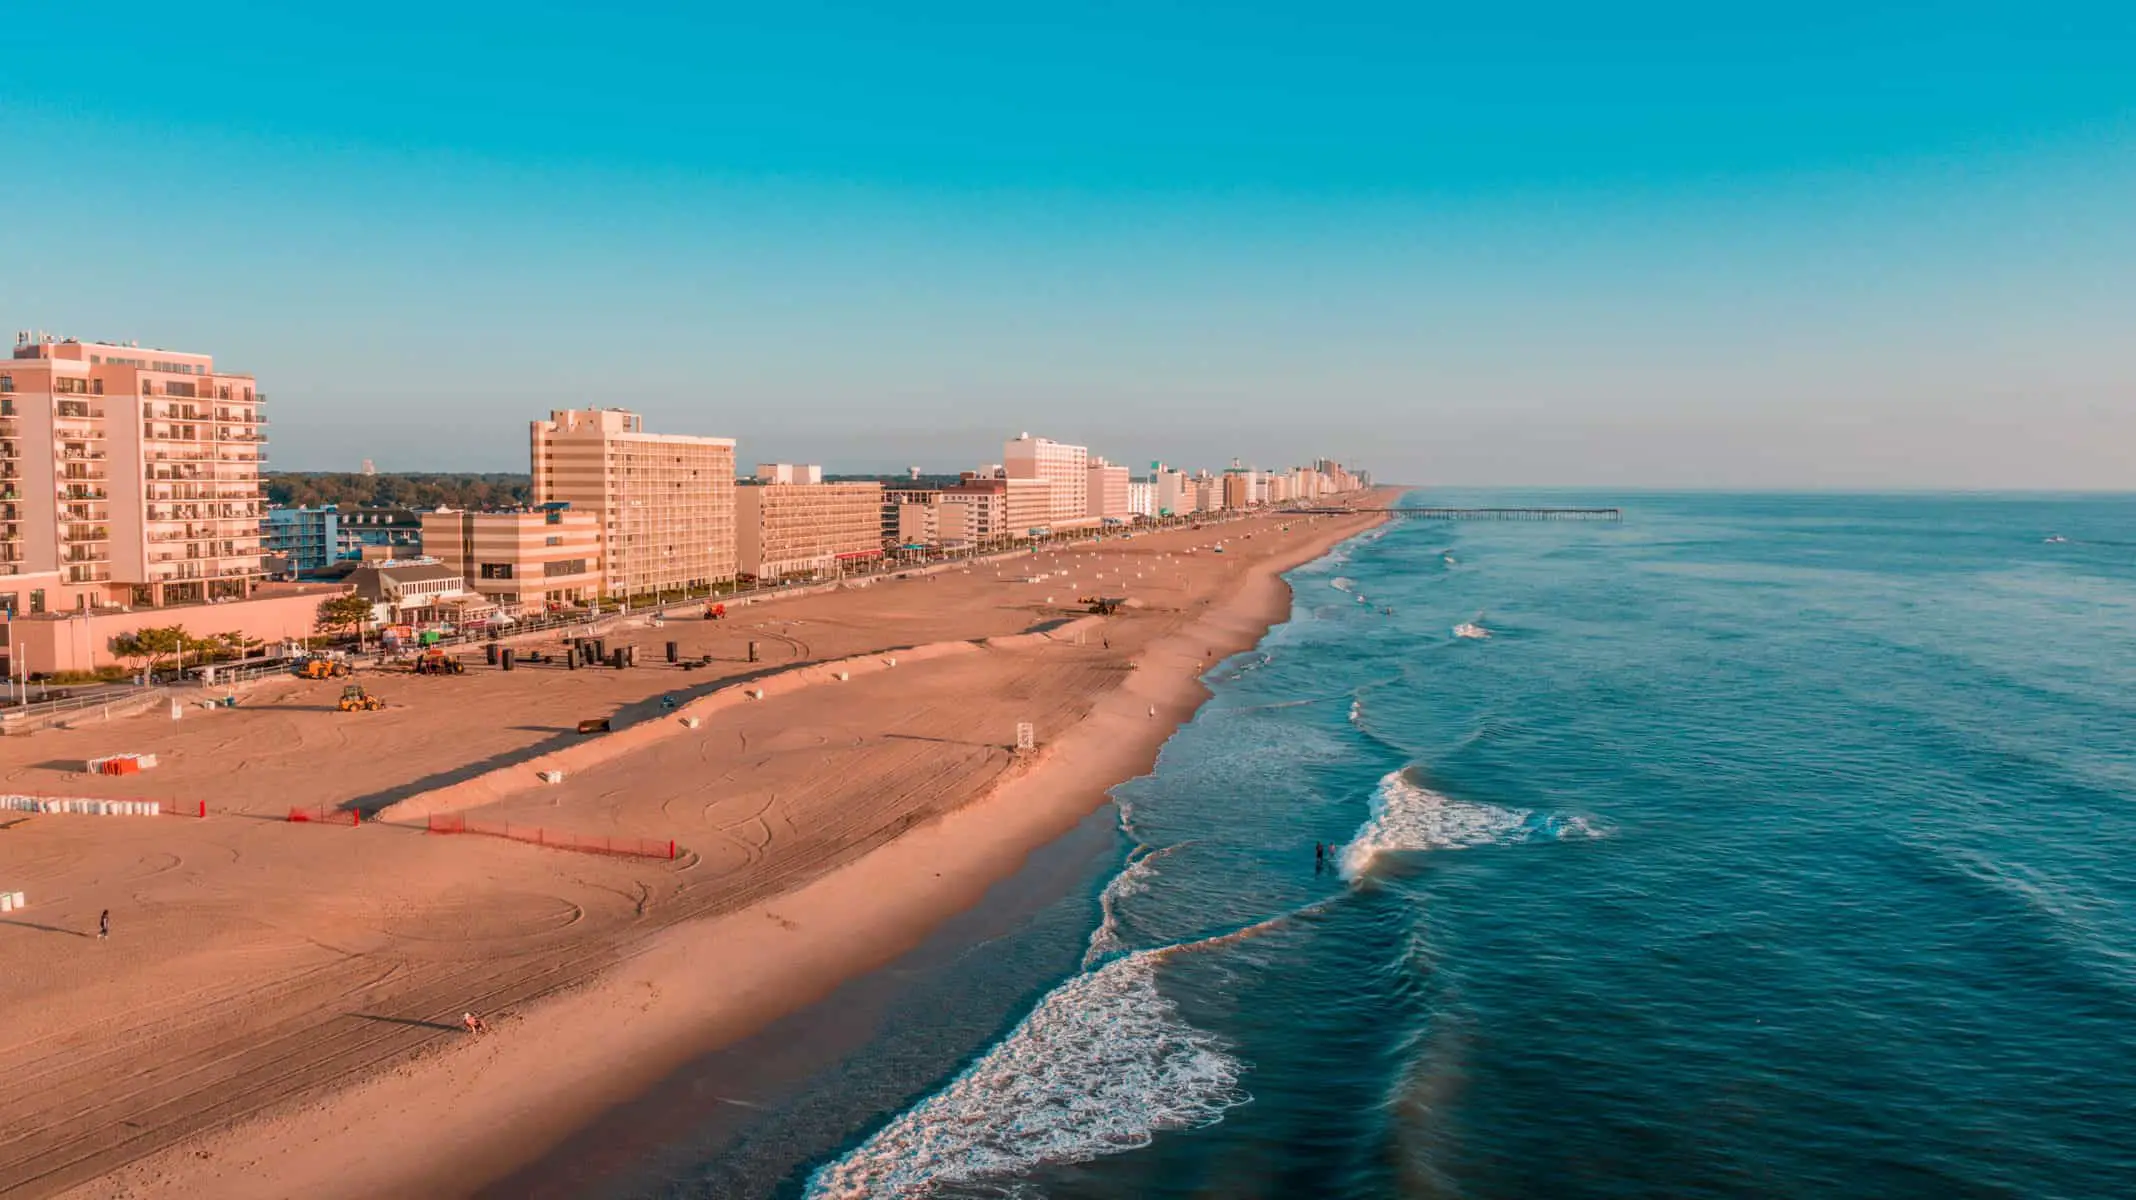 The wide and long Virginia Beach